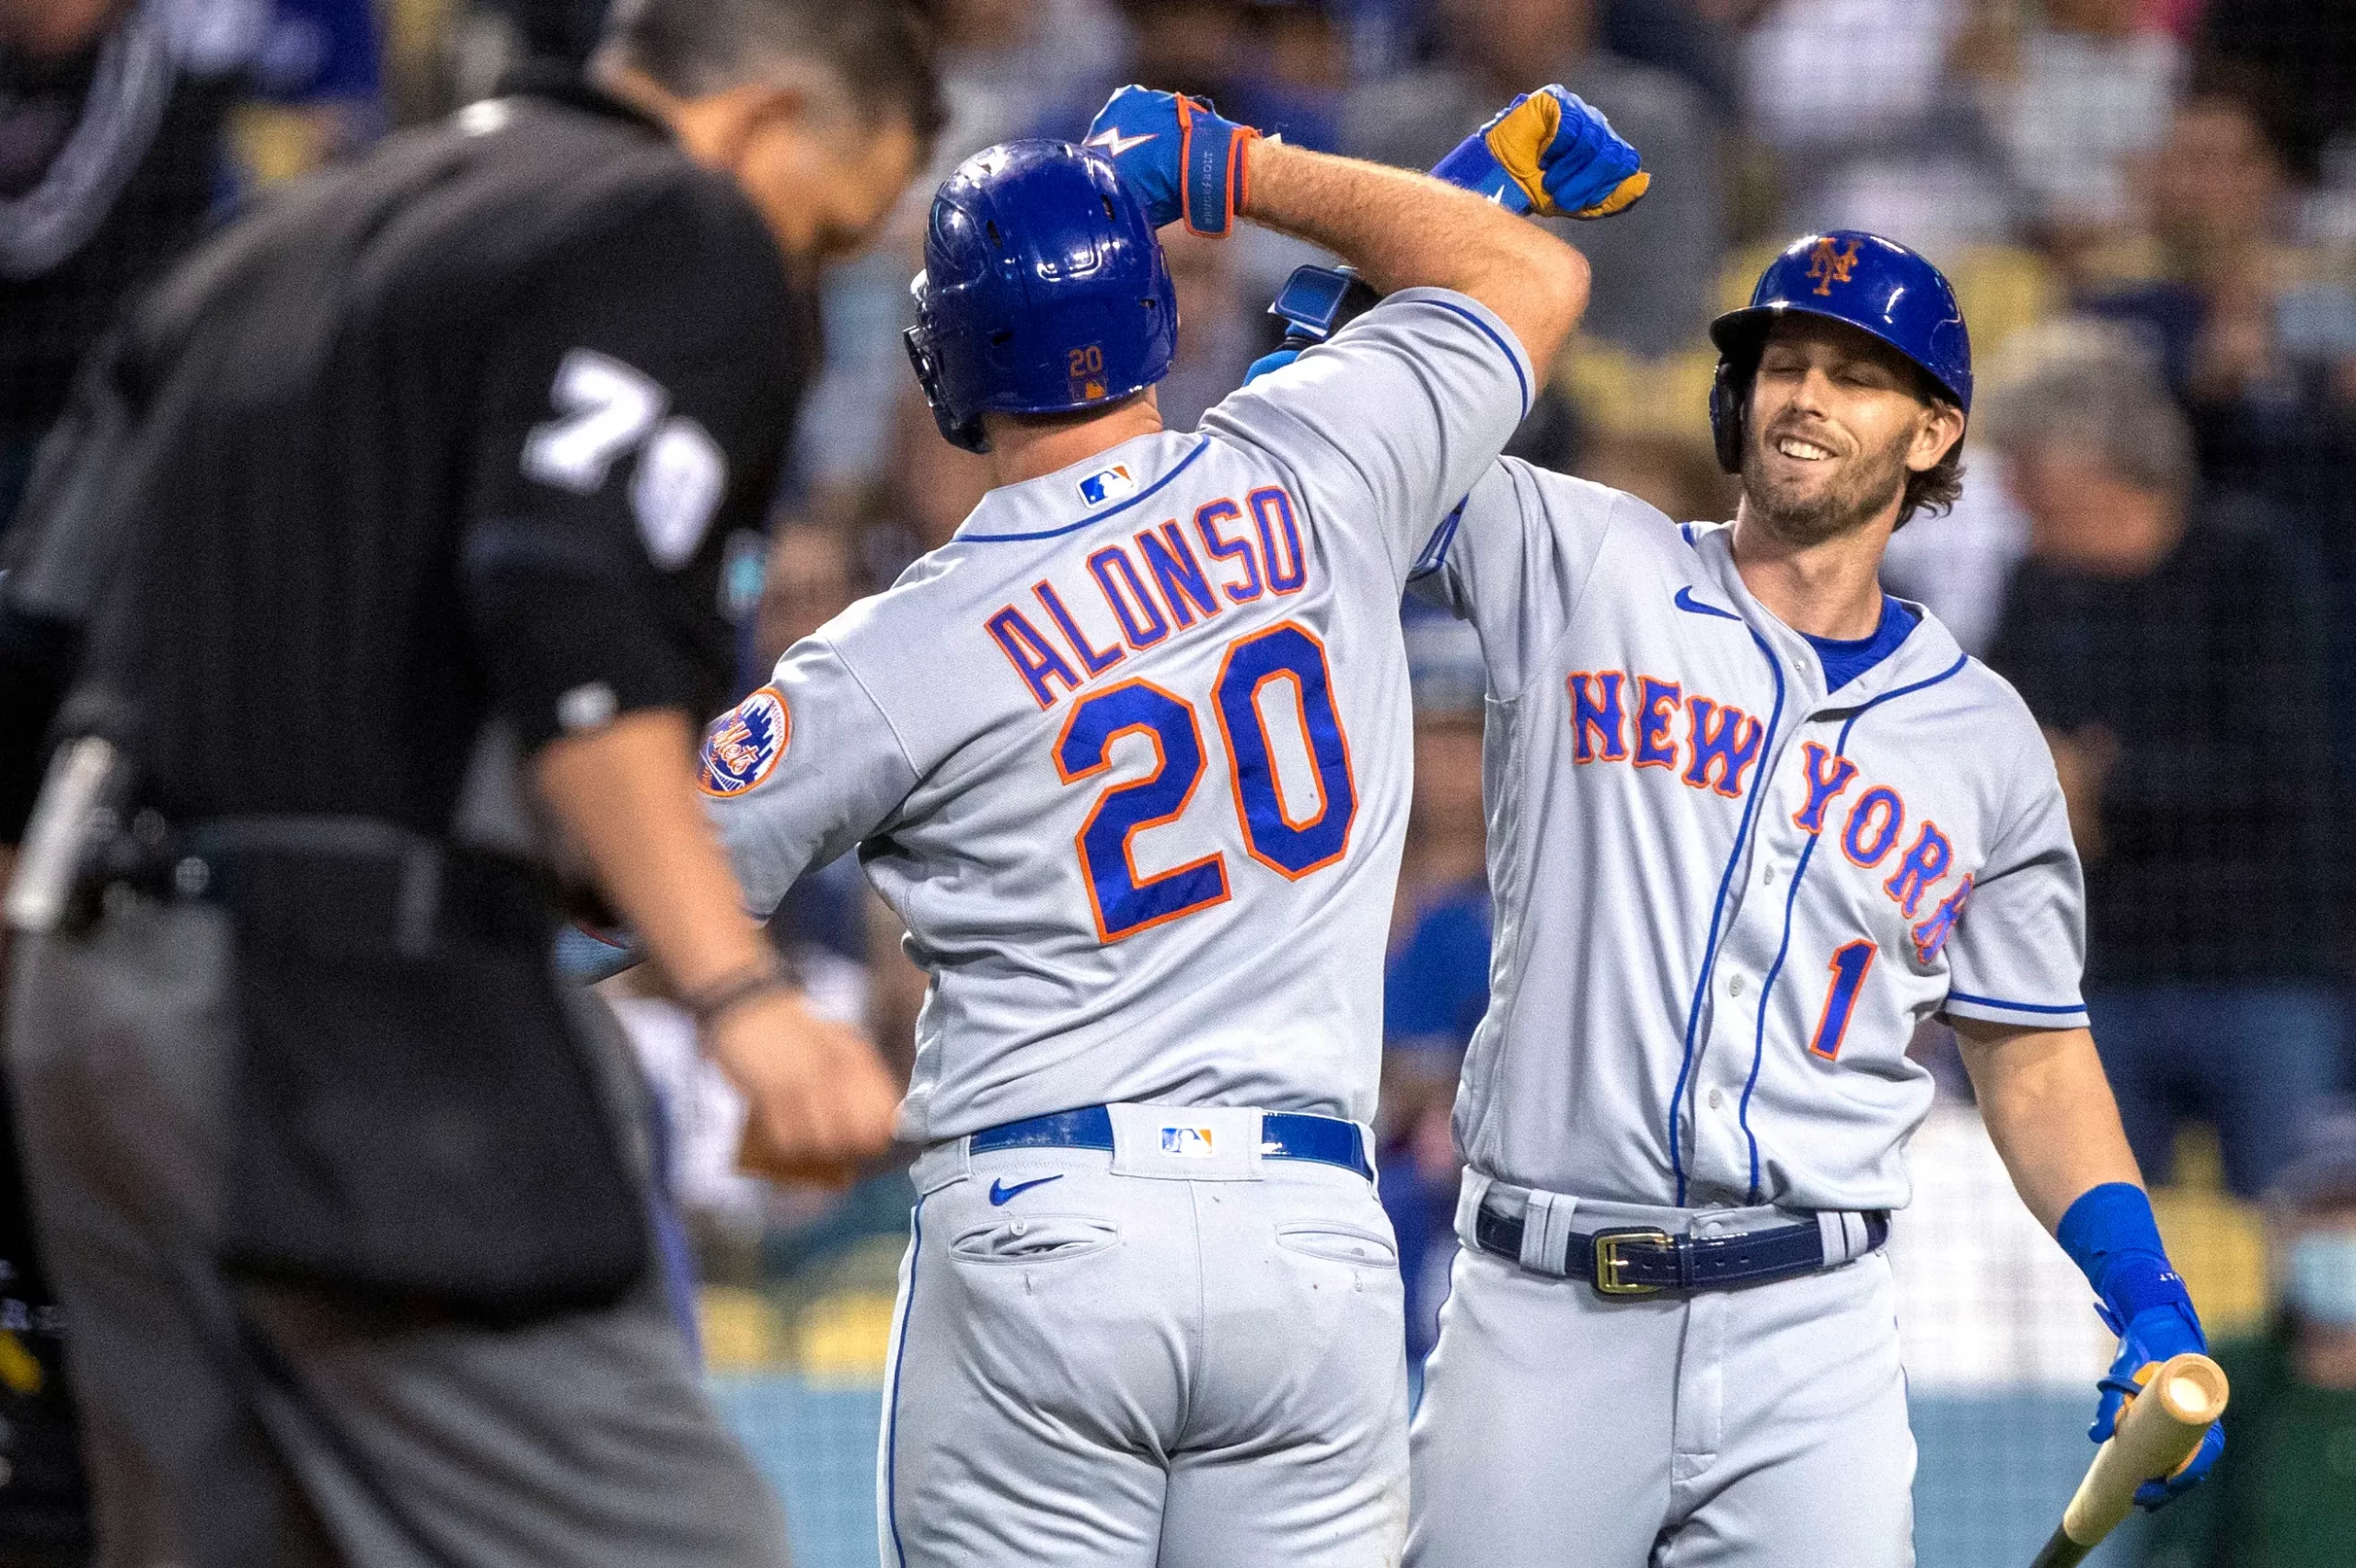 Pete Alonso’s two homers power Mets to big win over rival Dodgers